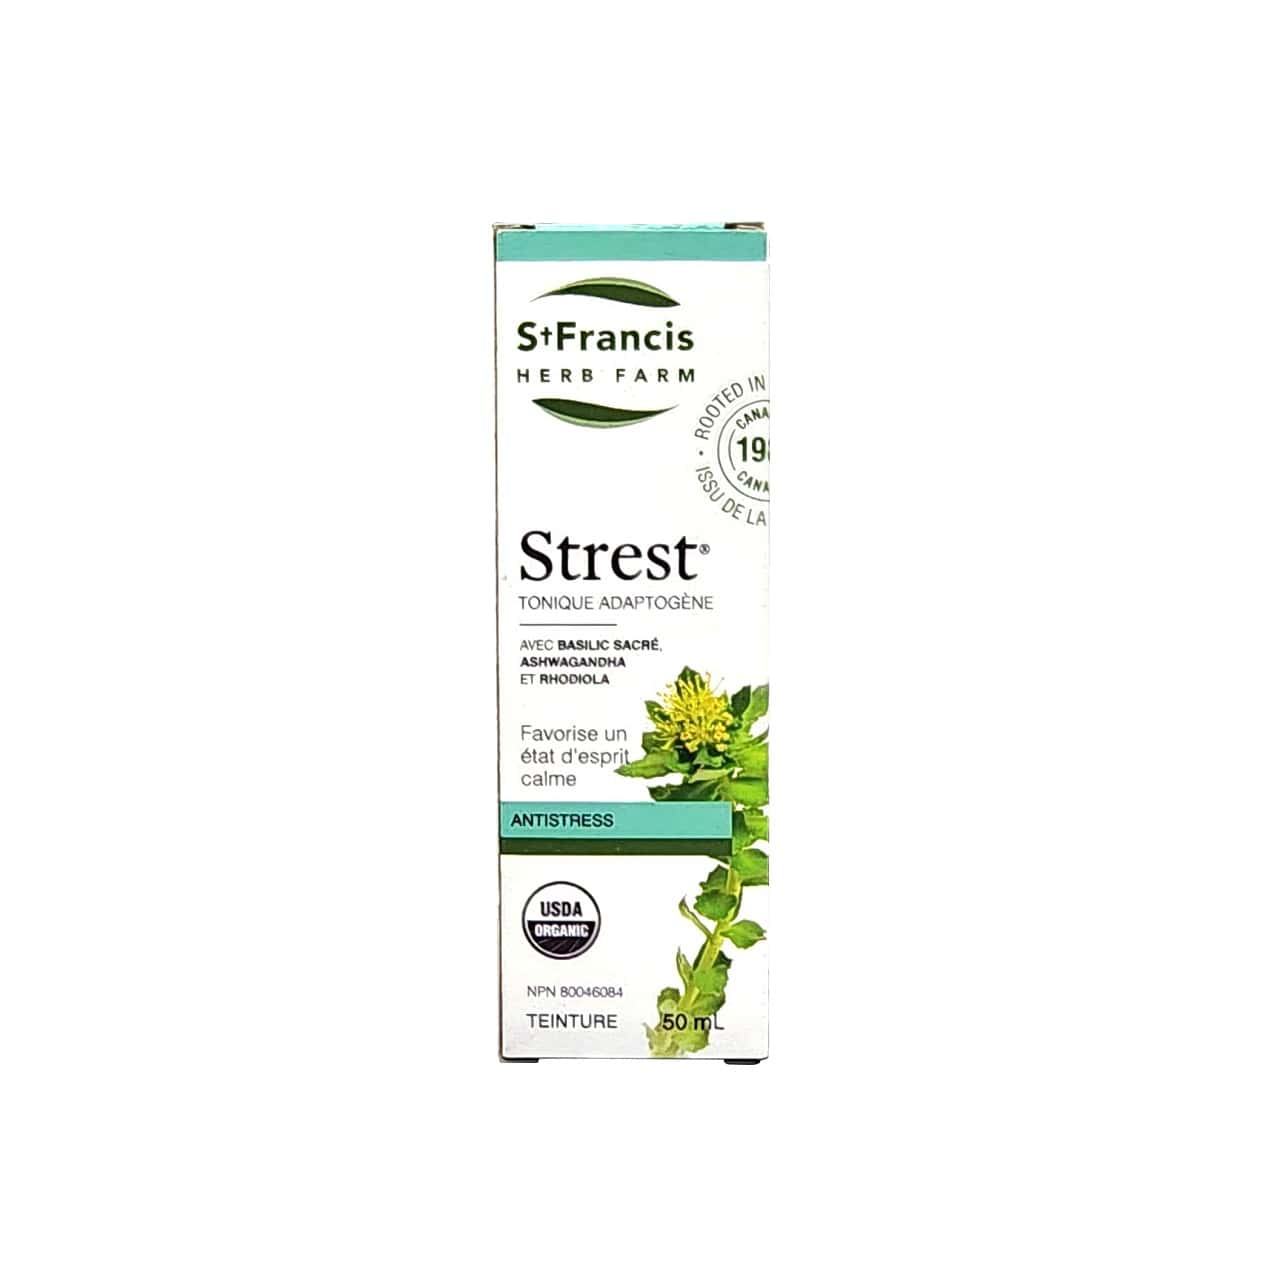 Product label for St. Francis Strest Adaptogenic Tonic for Stress Relief (50 mL) in French